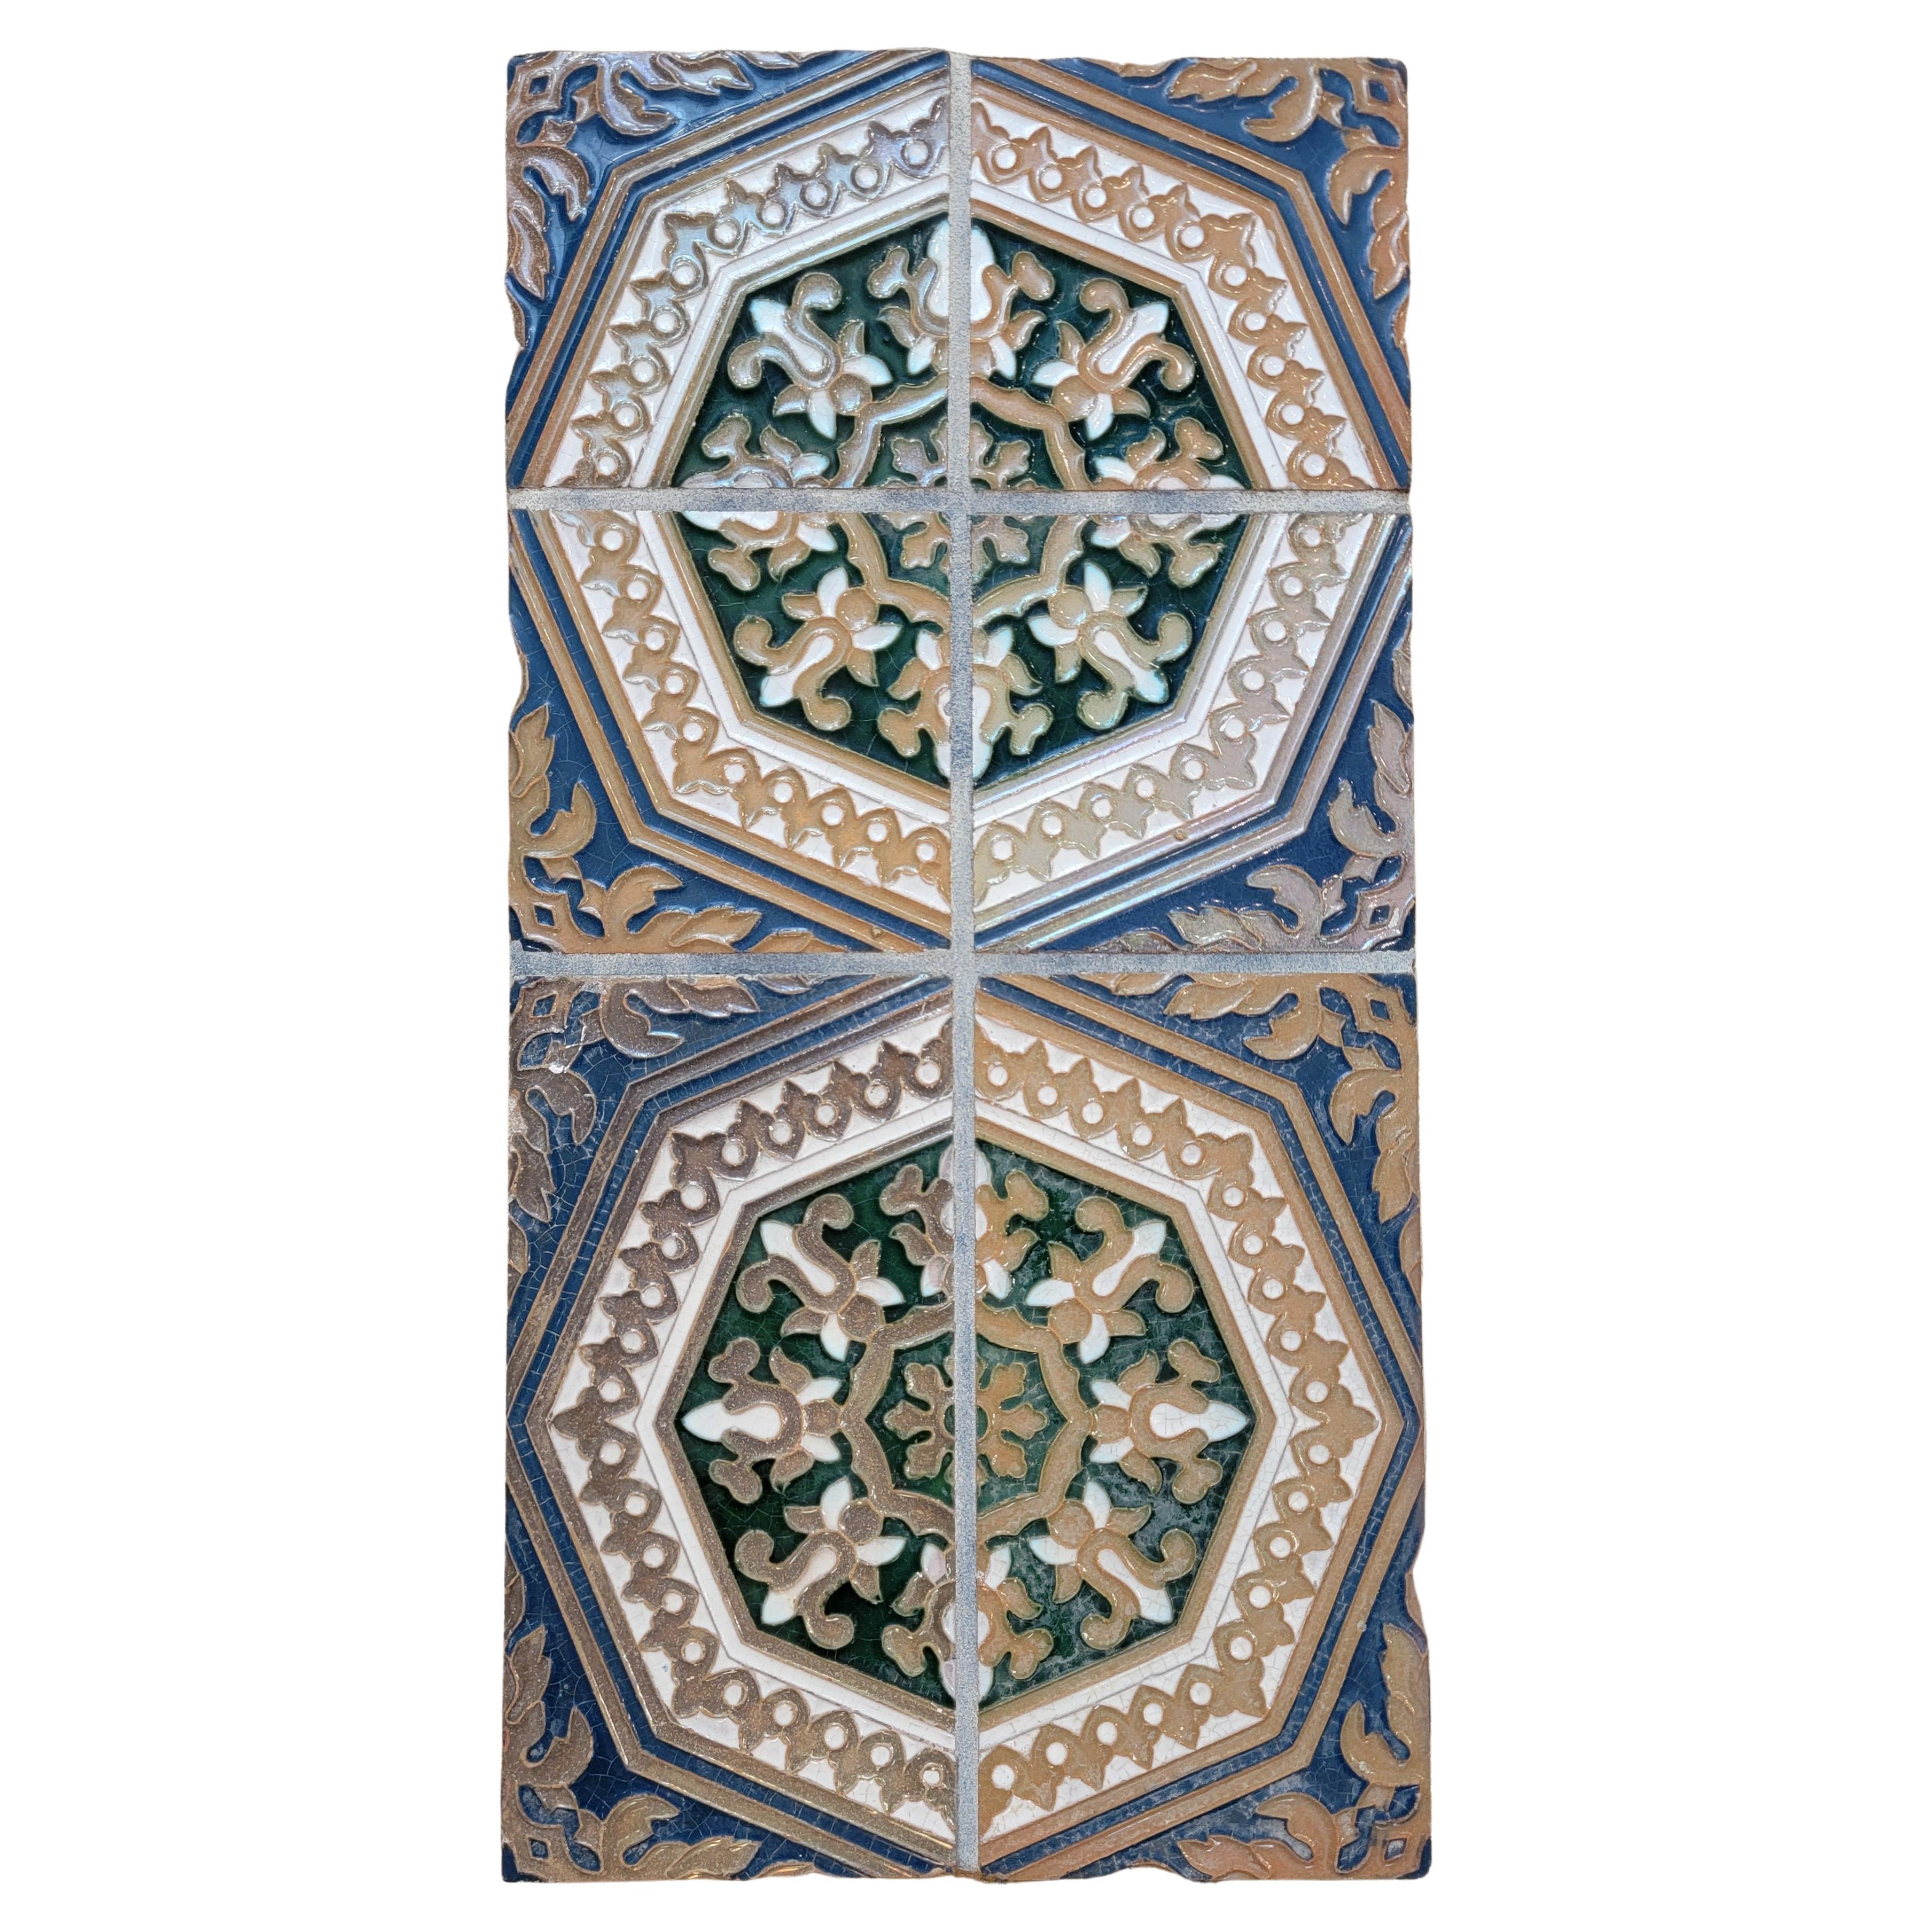 Octagonal Blue and Beige Tile Wall art or Table Top